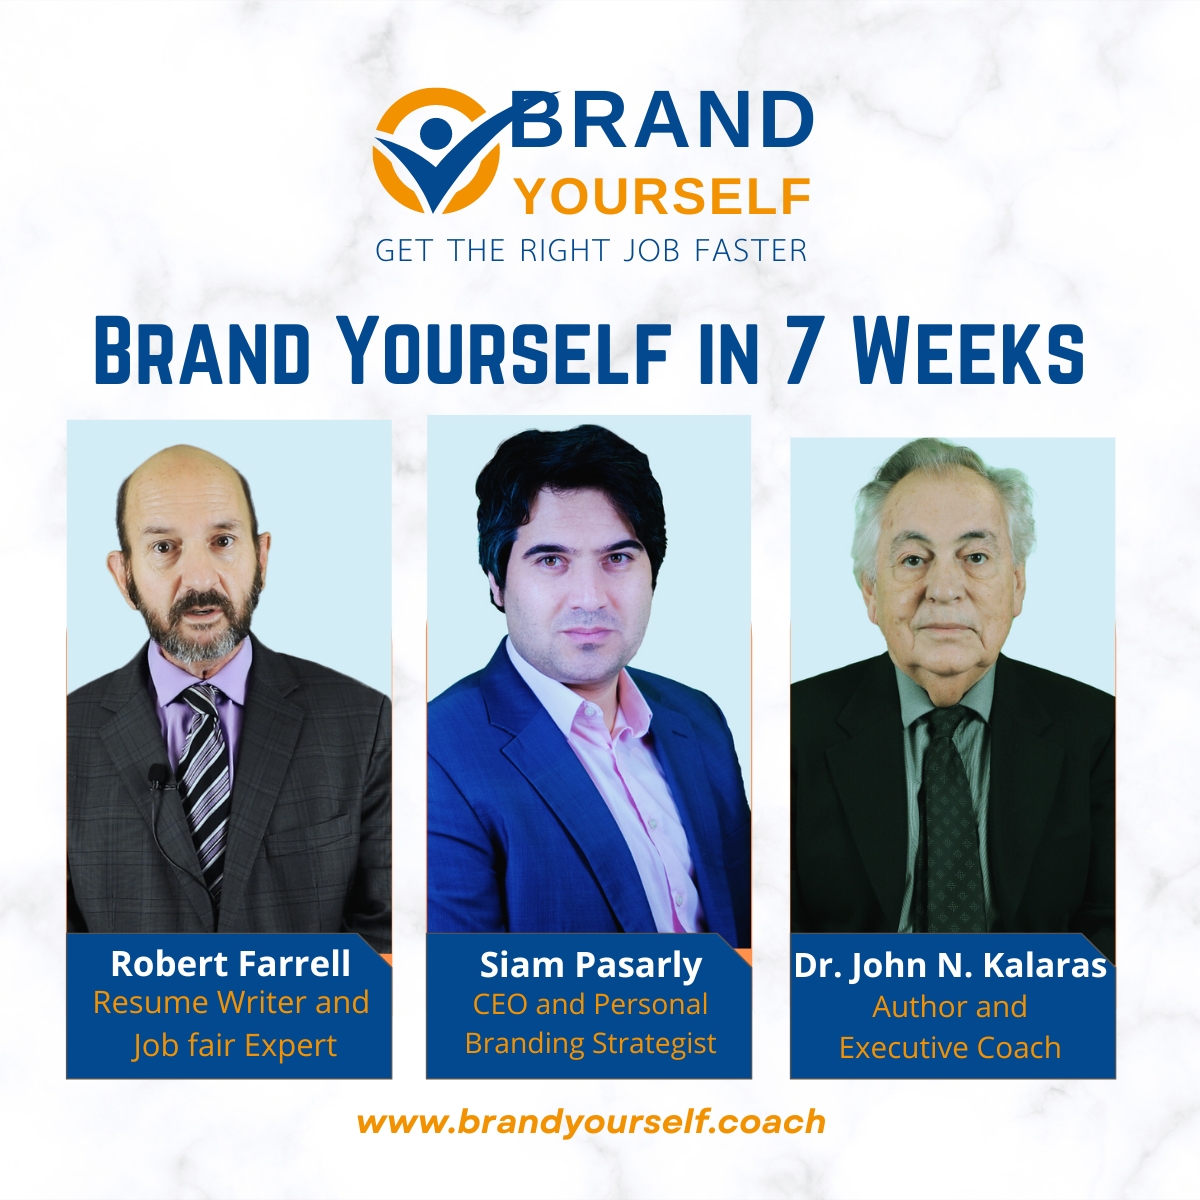 Get the Right Job Faster!<br />
Yourself<br />
Brand